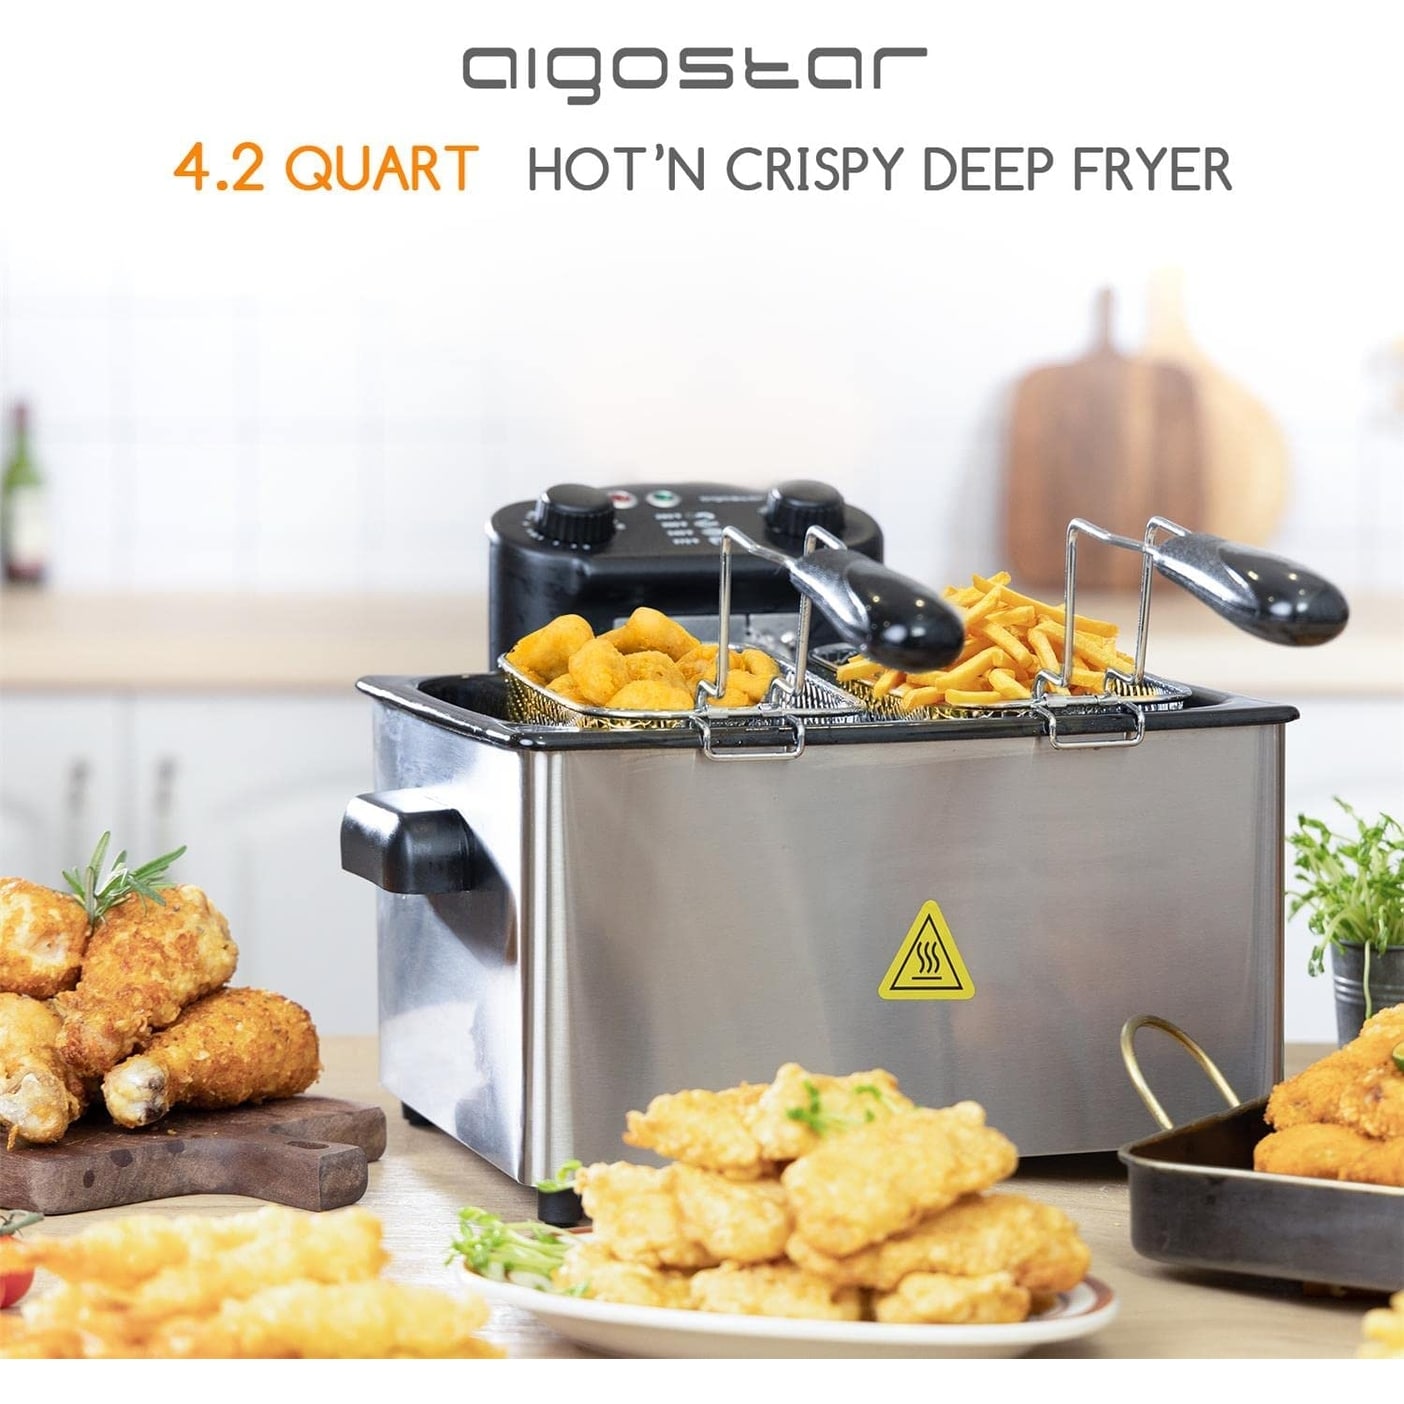 https://ak1.ostkcdn.com/images/products/is/images/direct/a8e62b8e8099aafbd724257d8e1d3ed620a6e08b/Deep-Fryer%2C-Electric-Deep-Fat-Fryers-with-Baskets%2C-3-Liters-Capacity-Oil-Frying-Pot-with-View-Window%2C-ETL-Certificated.jpg